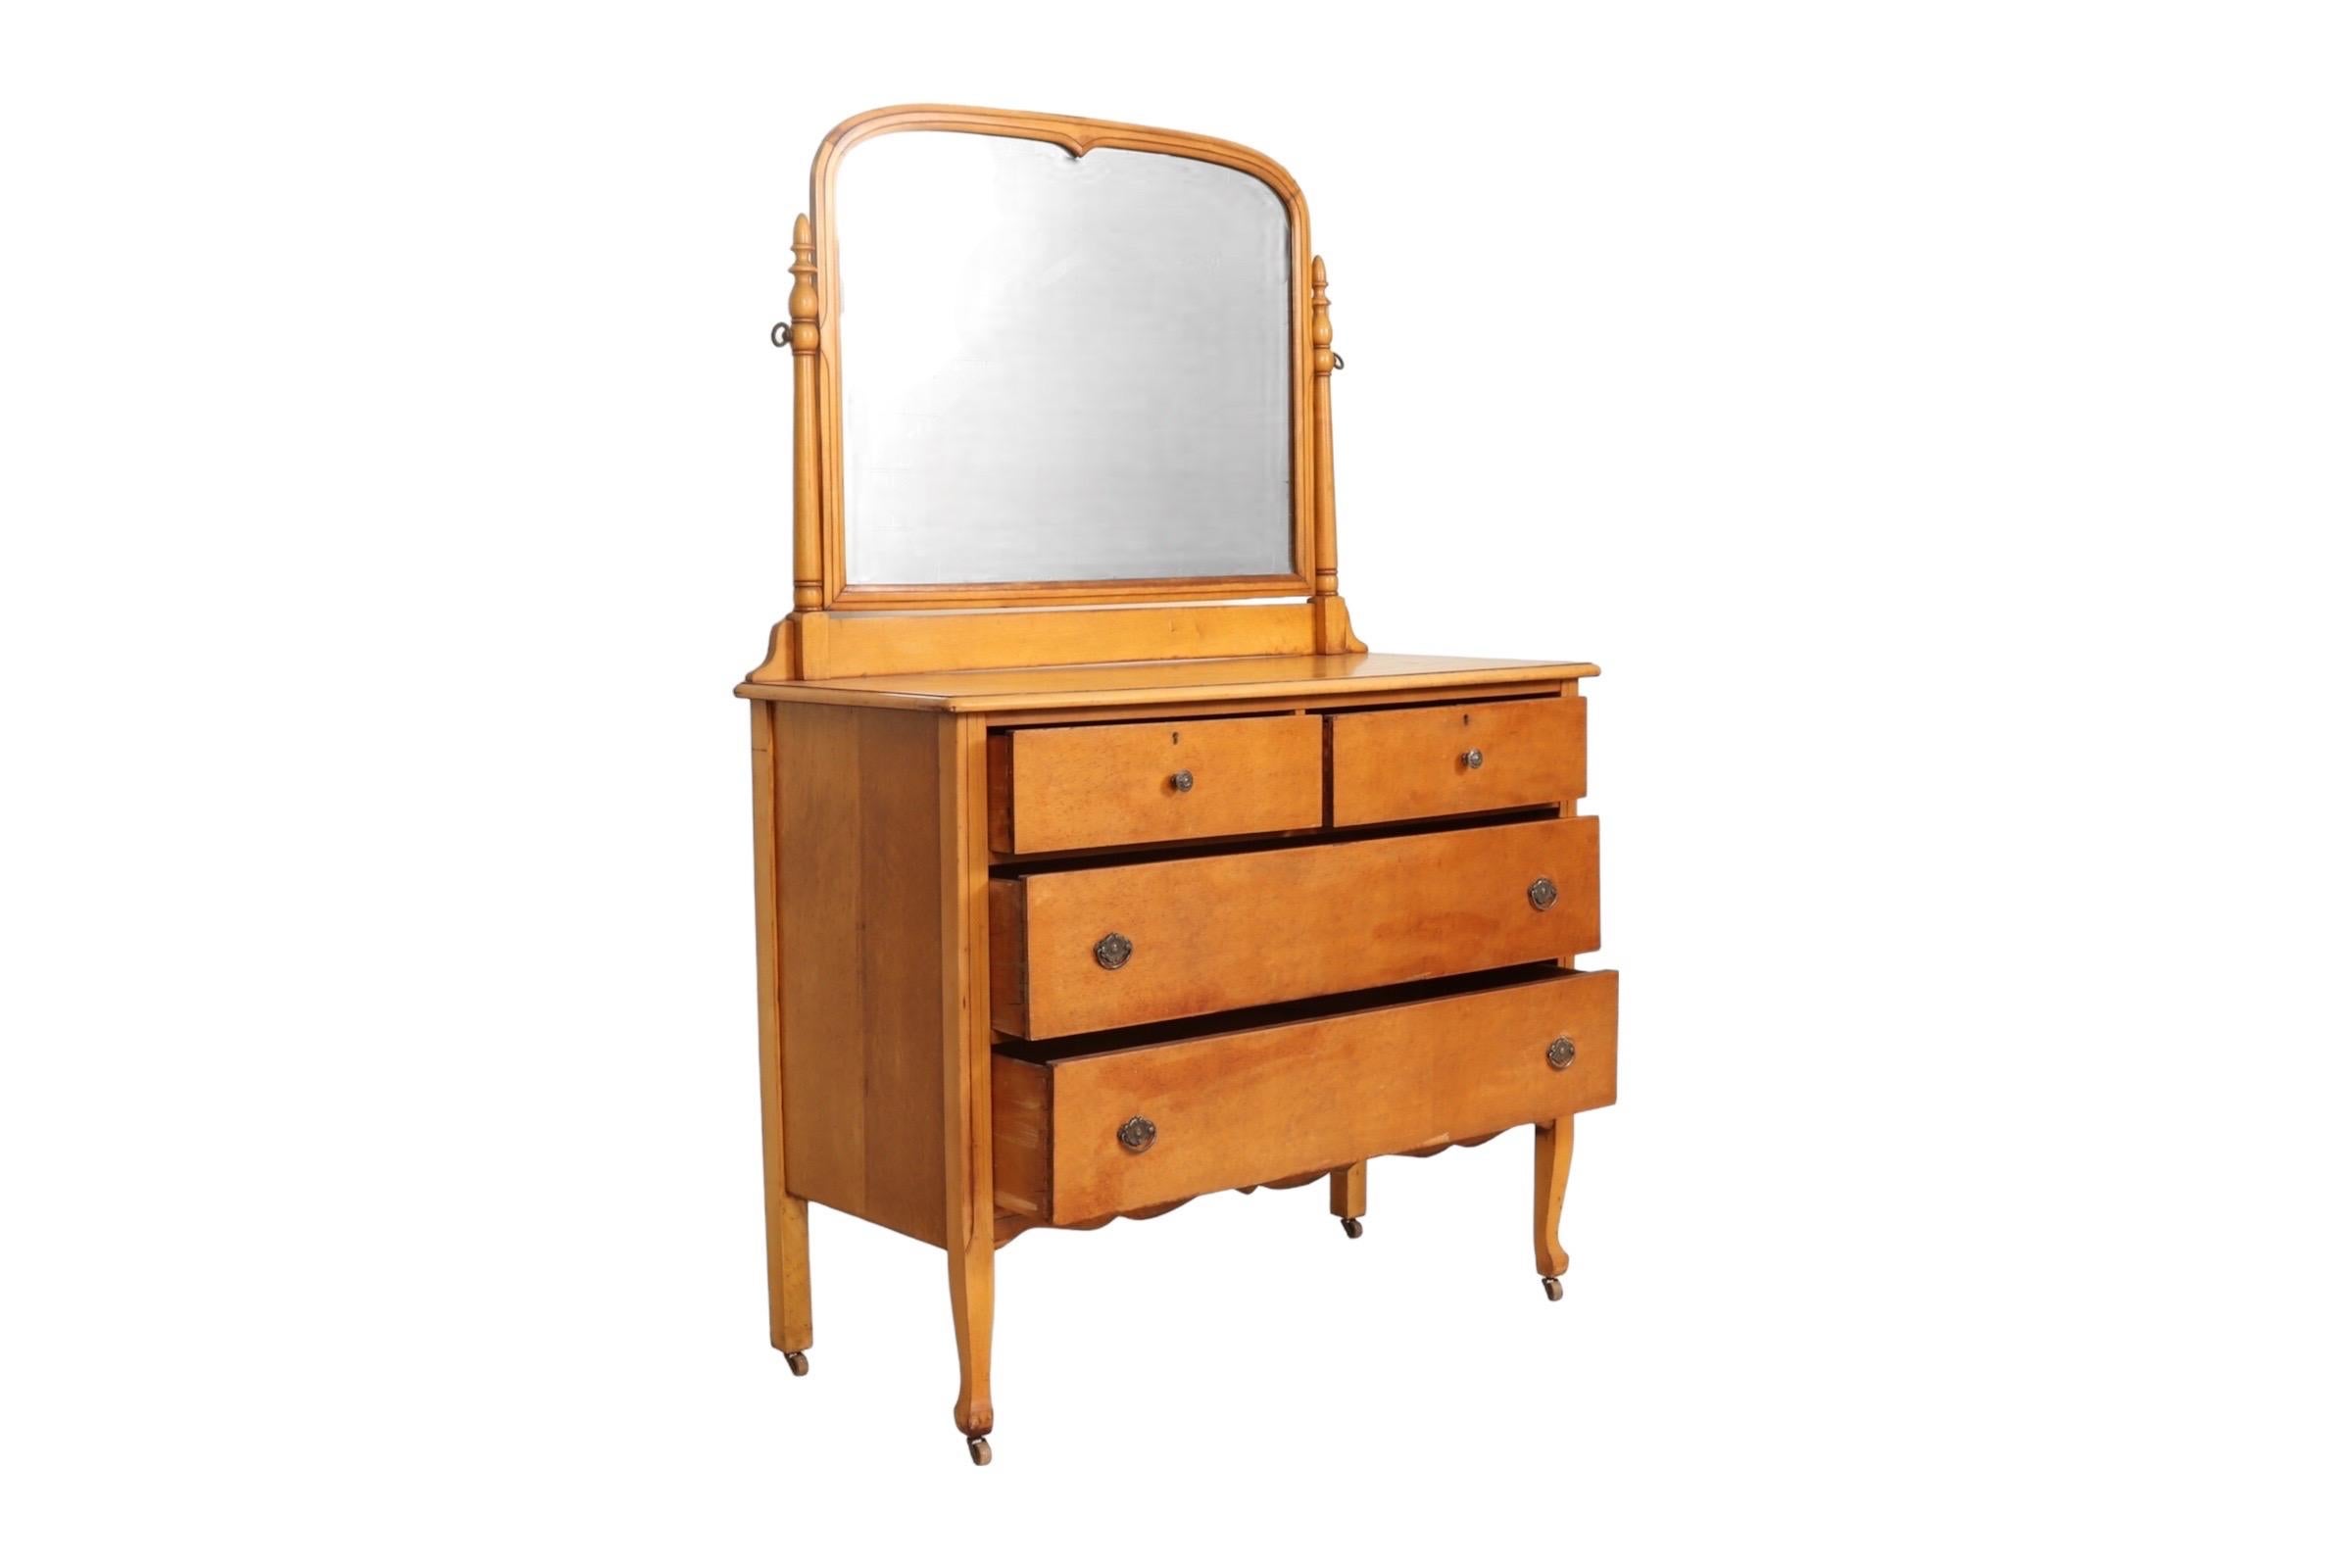 An antique two over two vanity dresser in birdseye maple made by Conewango Furniture Co of Warren, Pennsylvania. An arched mirror set in a simple beveled frame is supported with acorn topped turned posts. Dovetailed drawers open with simple cast